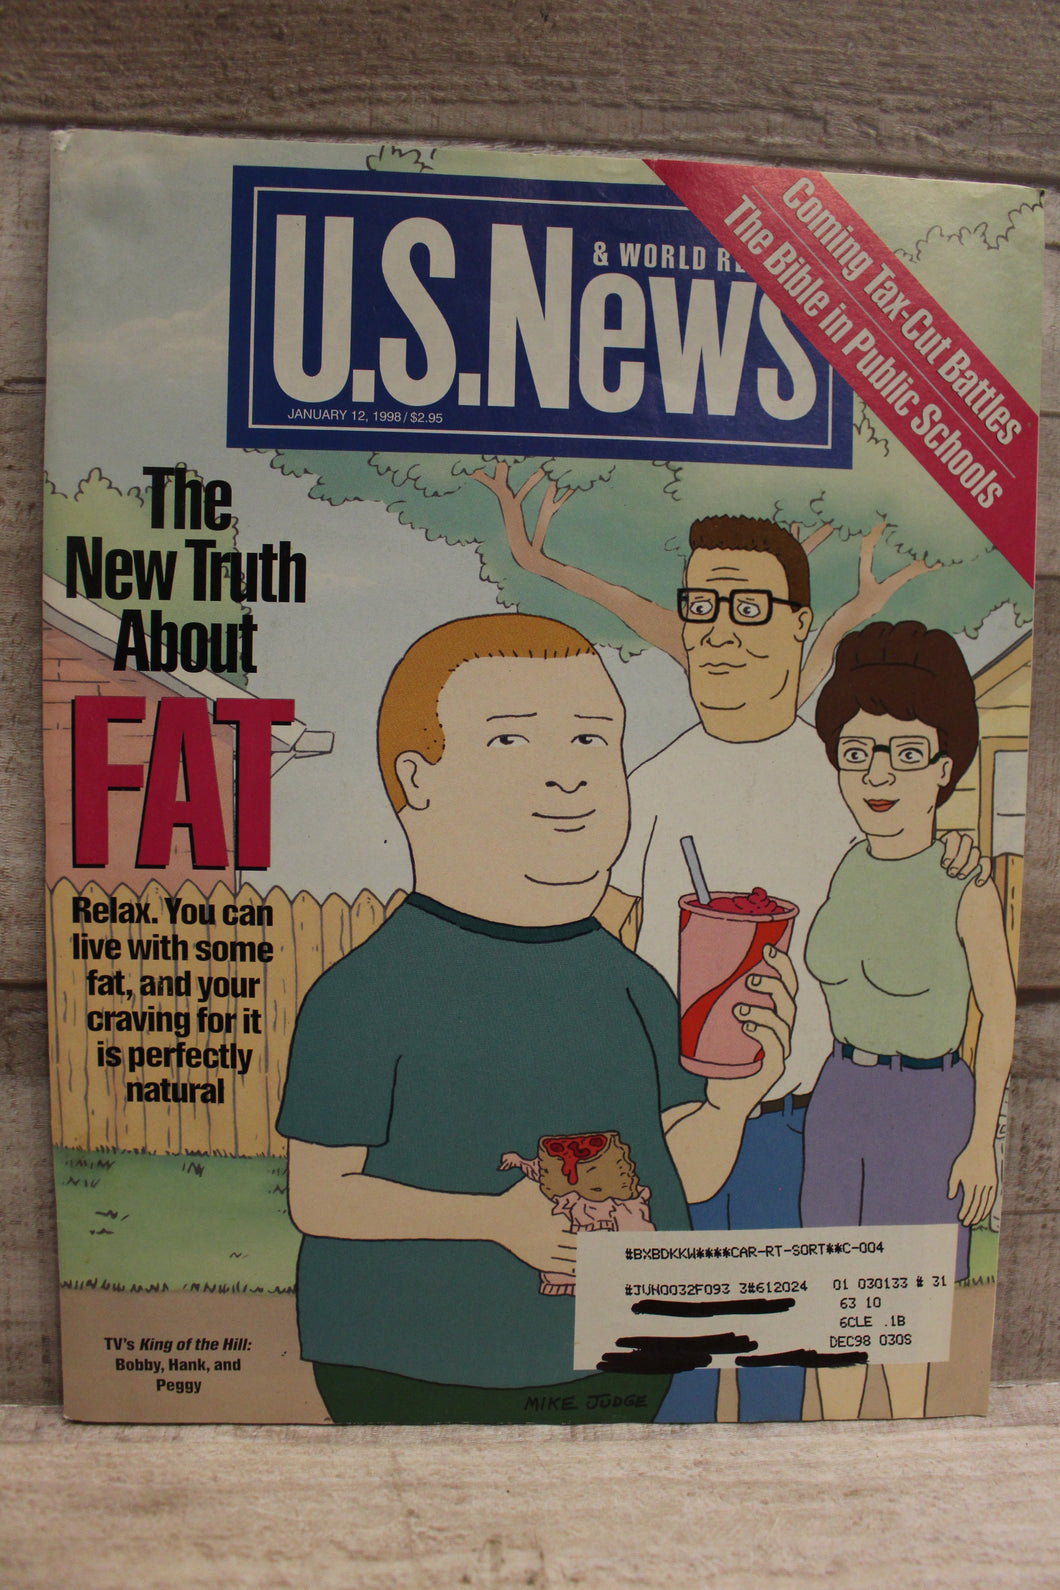 US News & World Report Magazine The New Truth About Fat -January 12, 1998 -Used